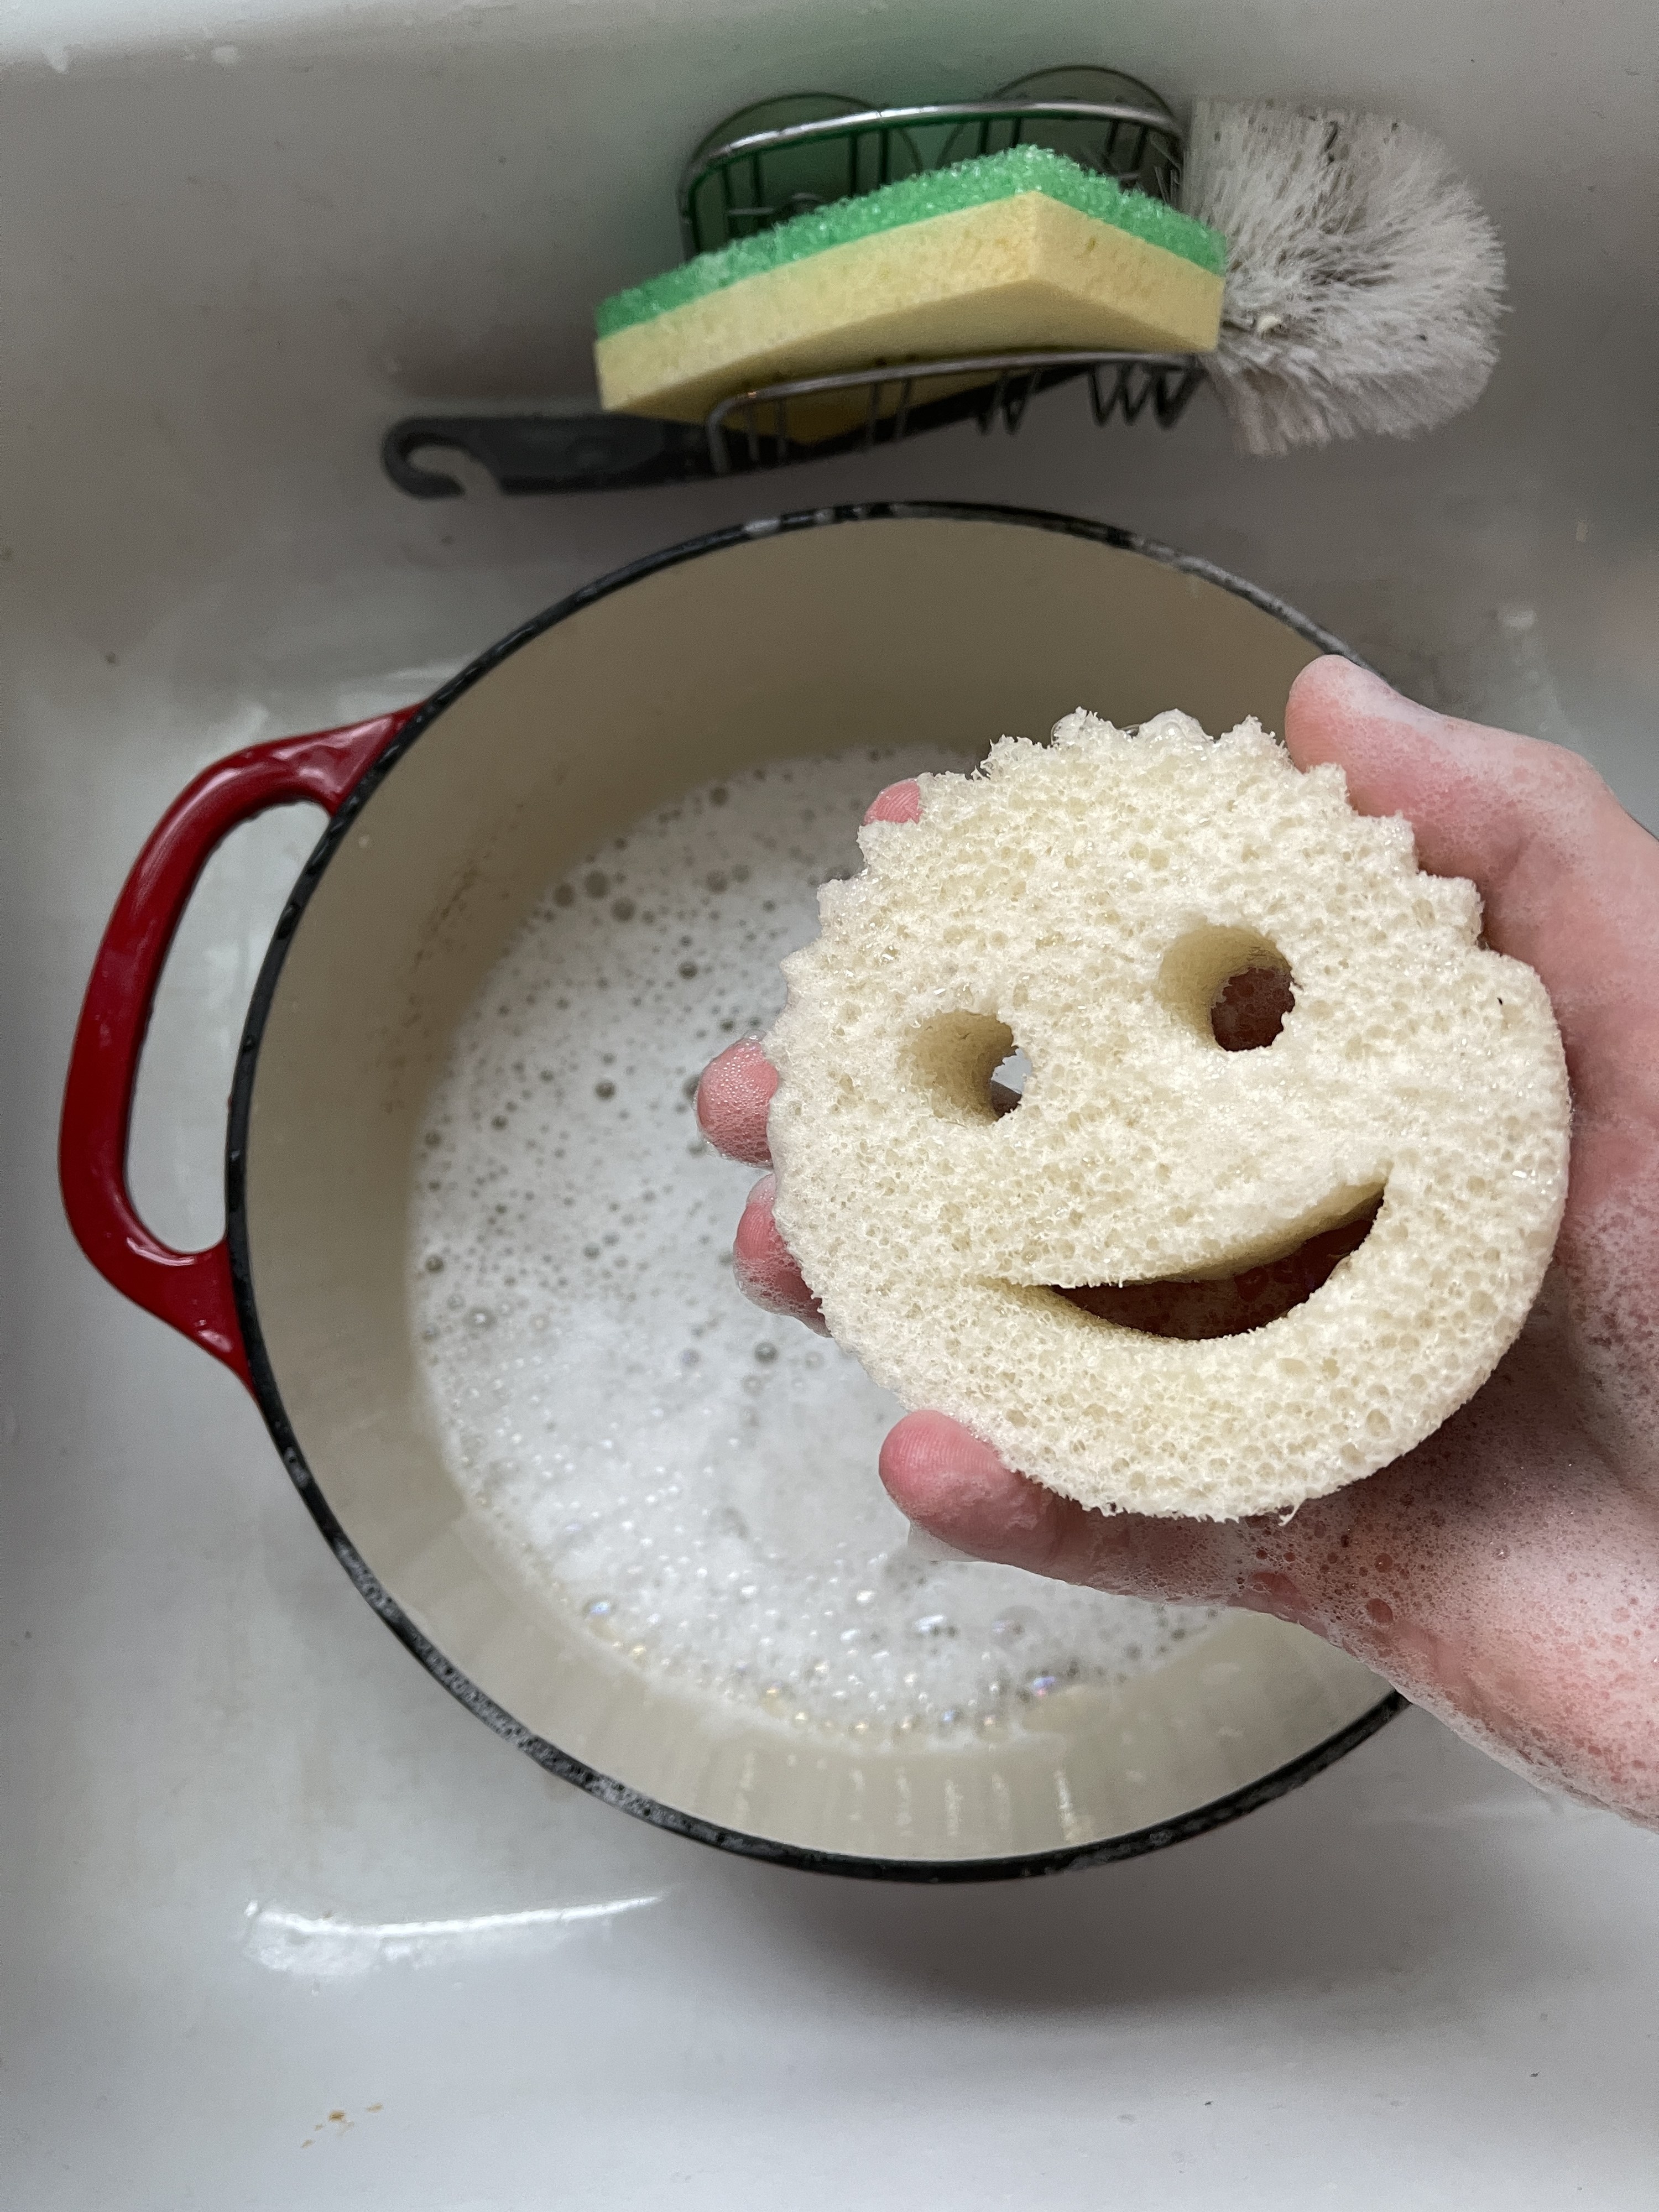 Holding a scrub daddy sponge over a dirty Dutch oven in the sink